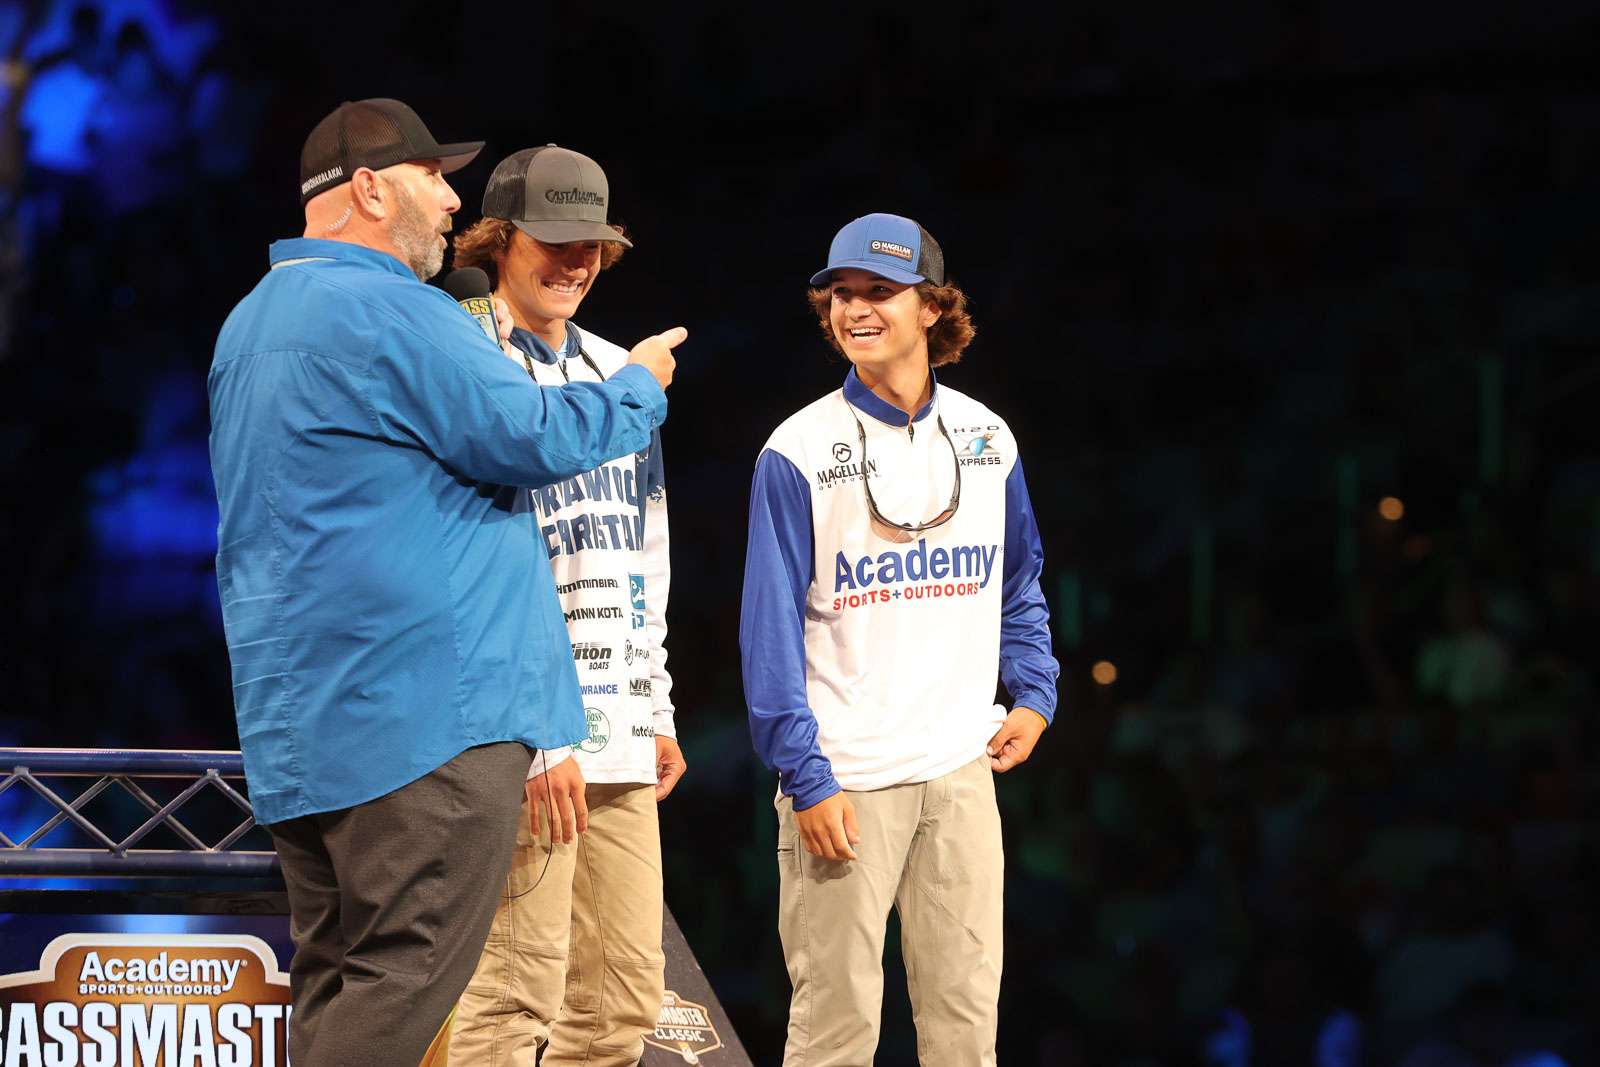 Check out all the action from the Day 2 weigh-in from the 2021 Academy Sports + Outdoors Bassmaster Classic presented by Huk!